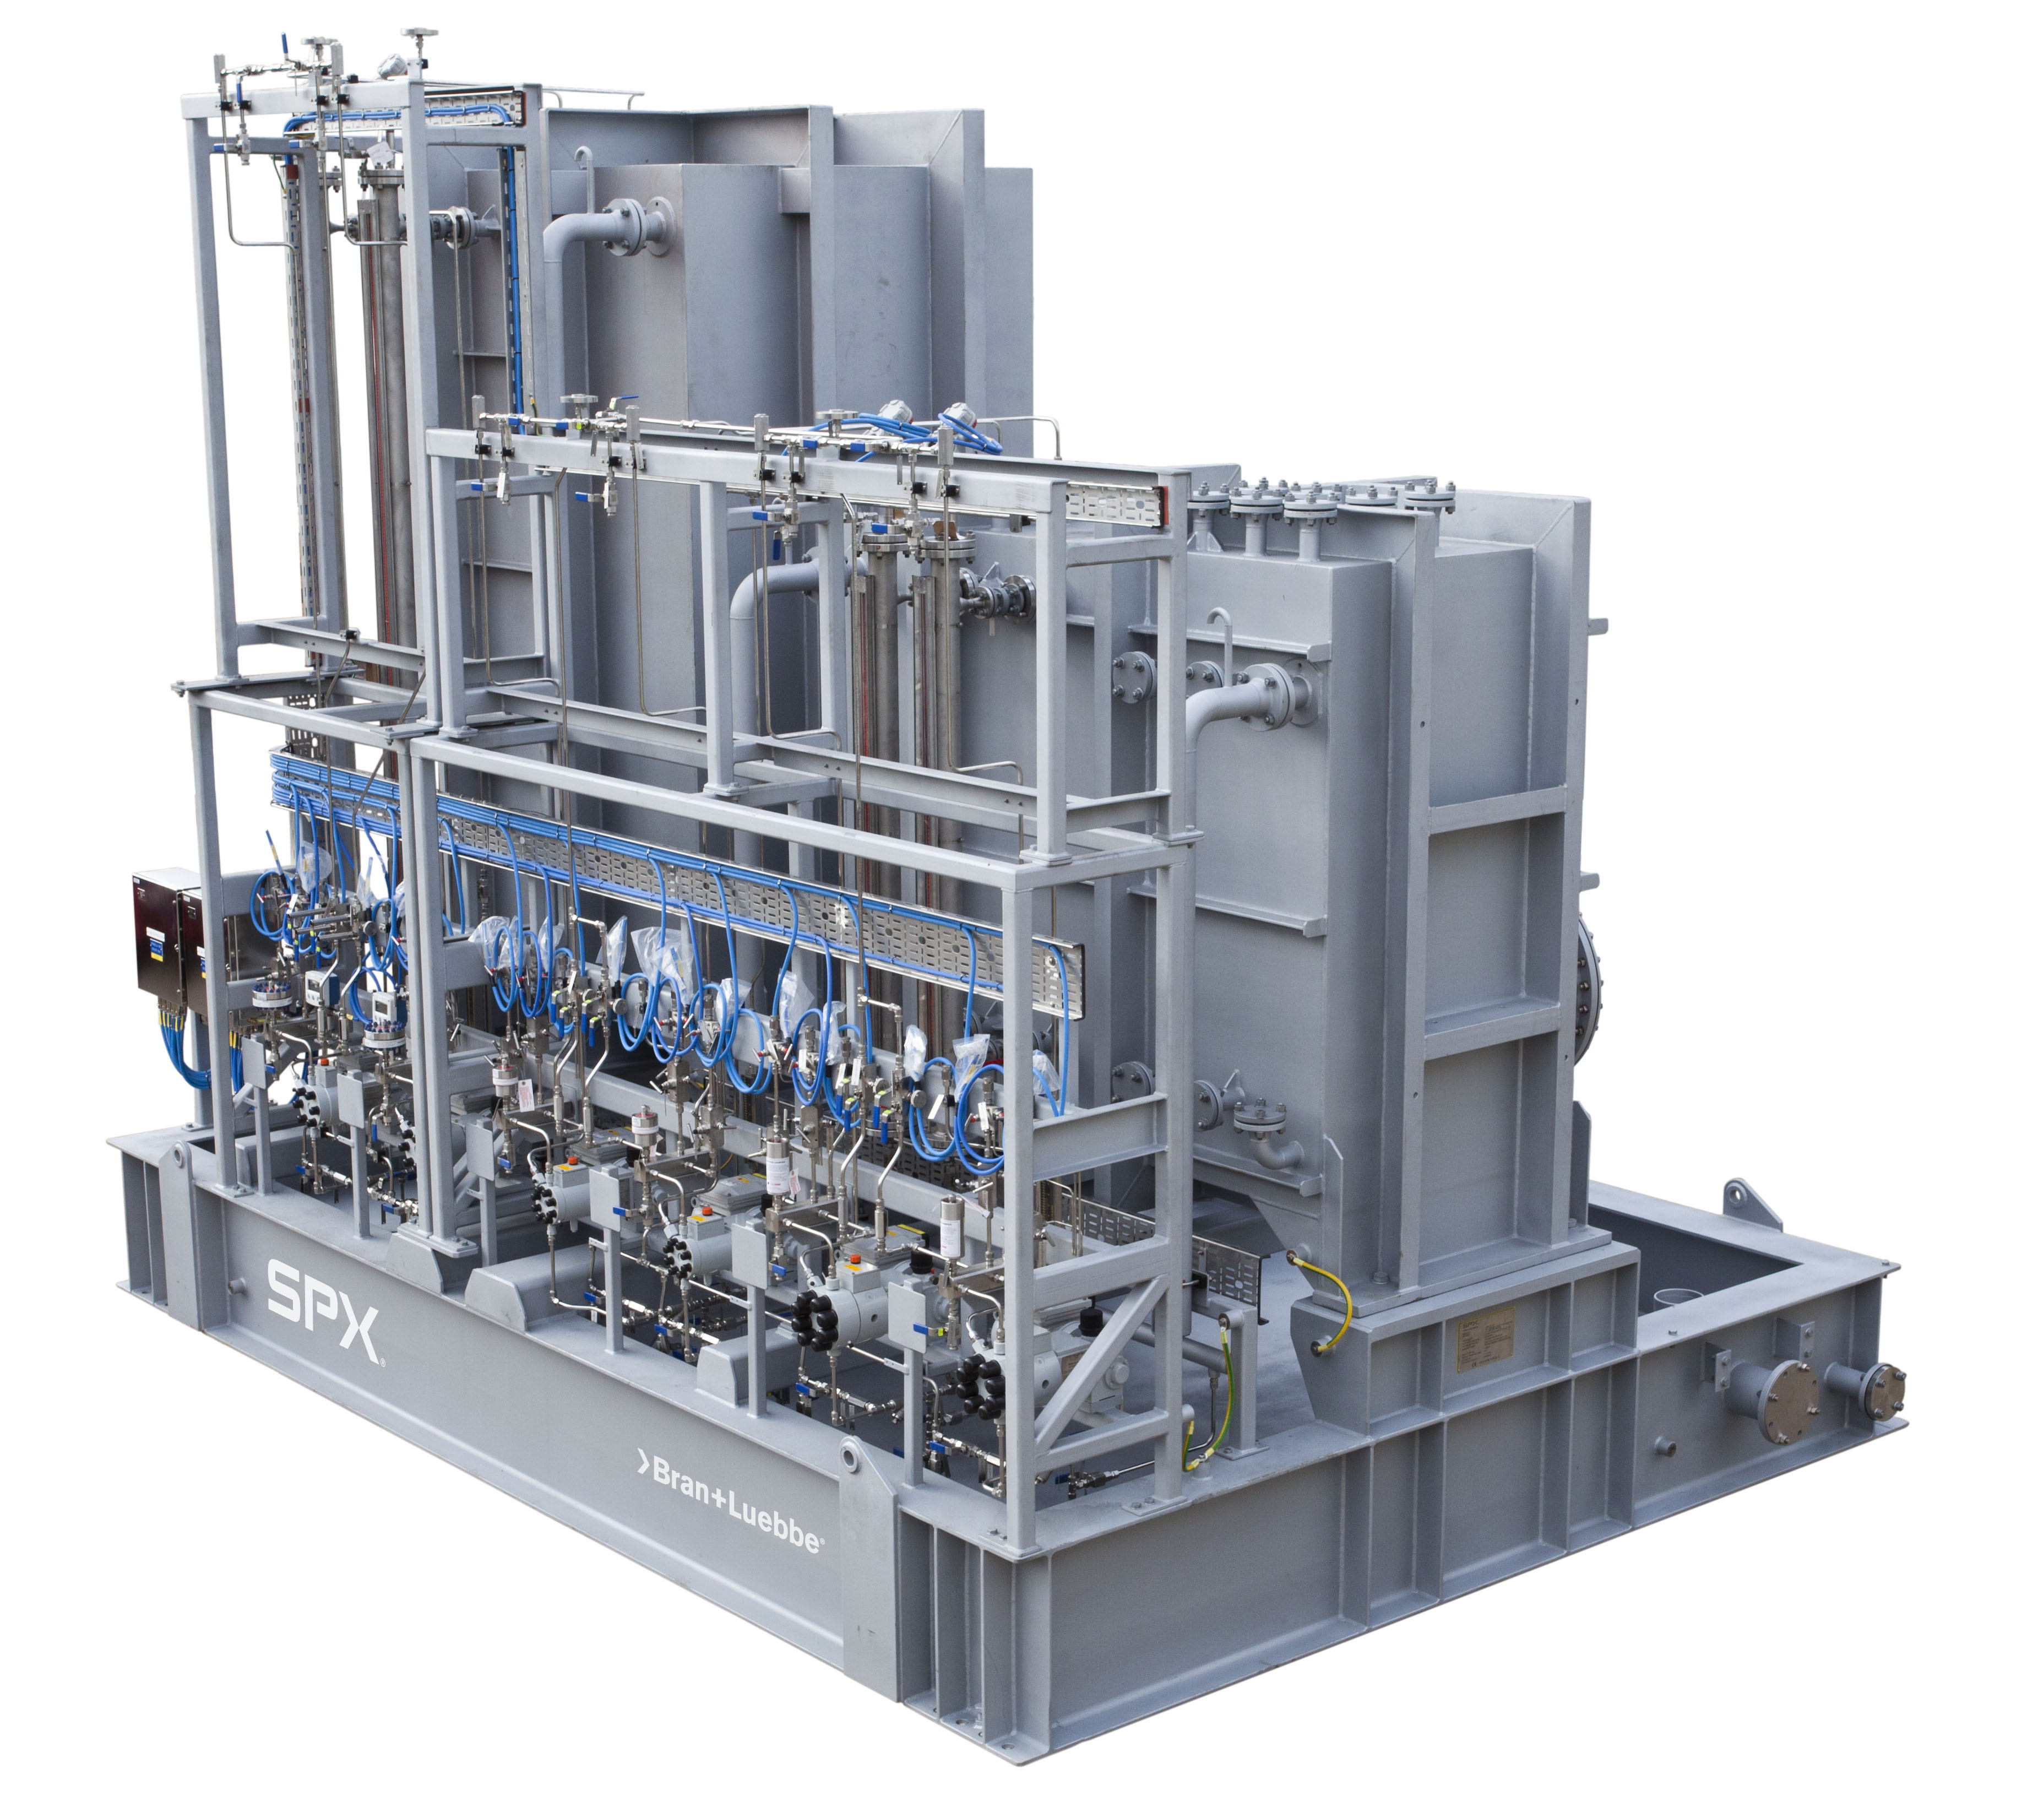 A multi-compartment chemical injection package from SPX Flow.